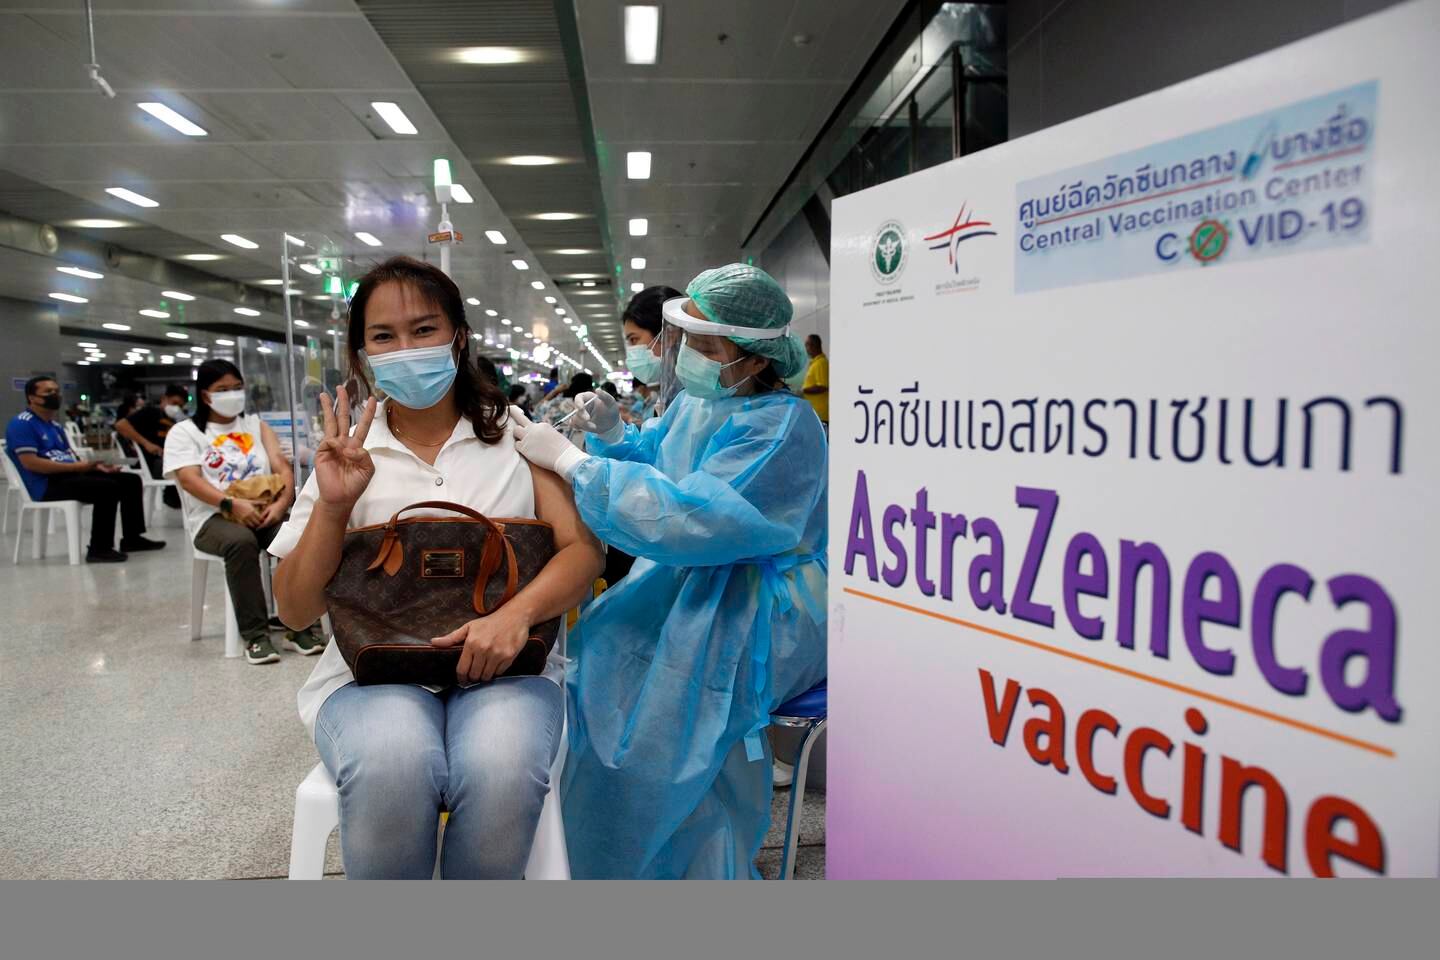 A Thai woman gestures while receiving a dose of AstraZeneca vaccine. Only a quarter of the population are vaccinated so far. EPA / Rungroj Yongrit